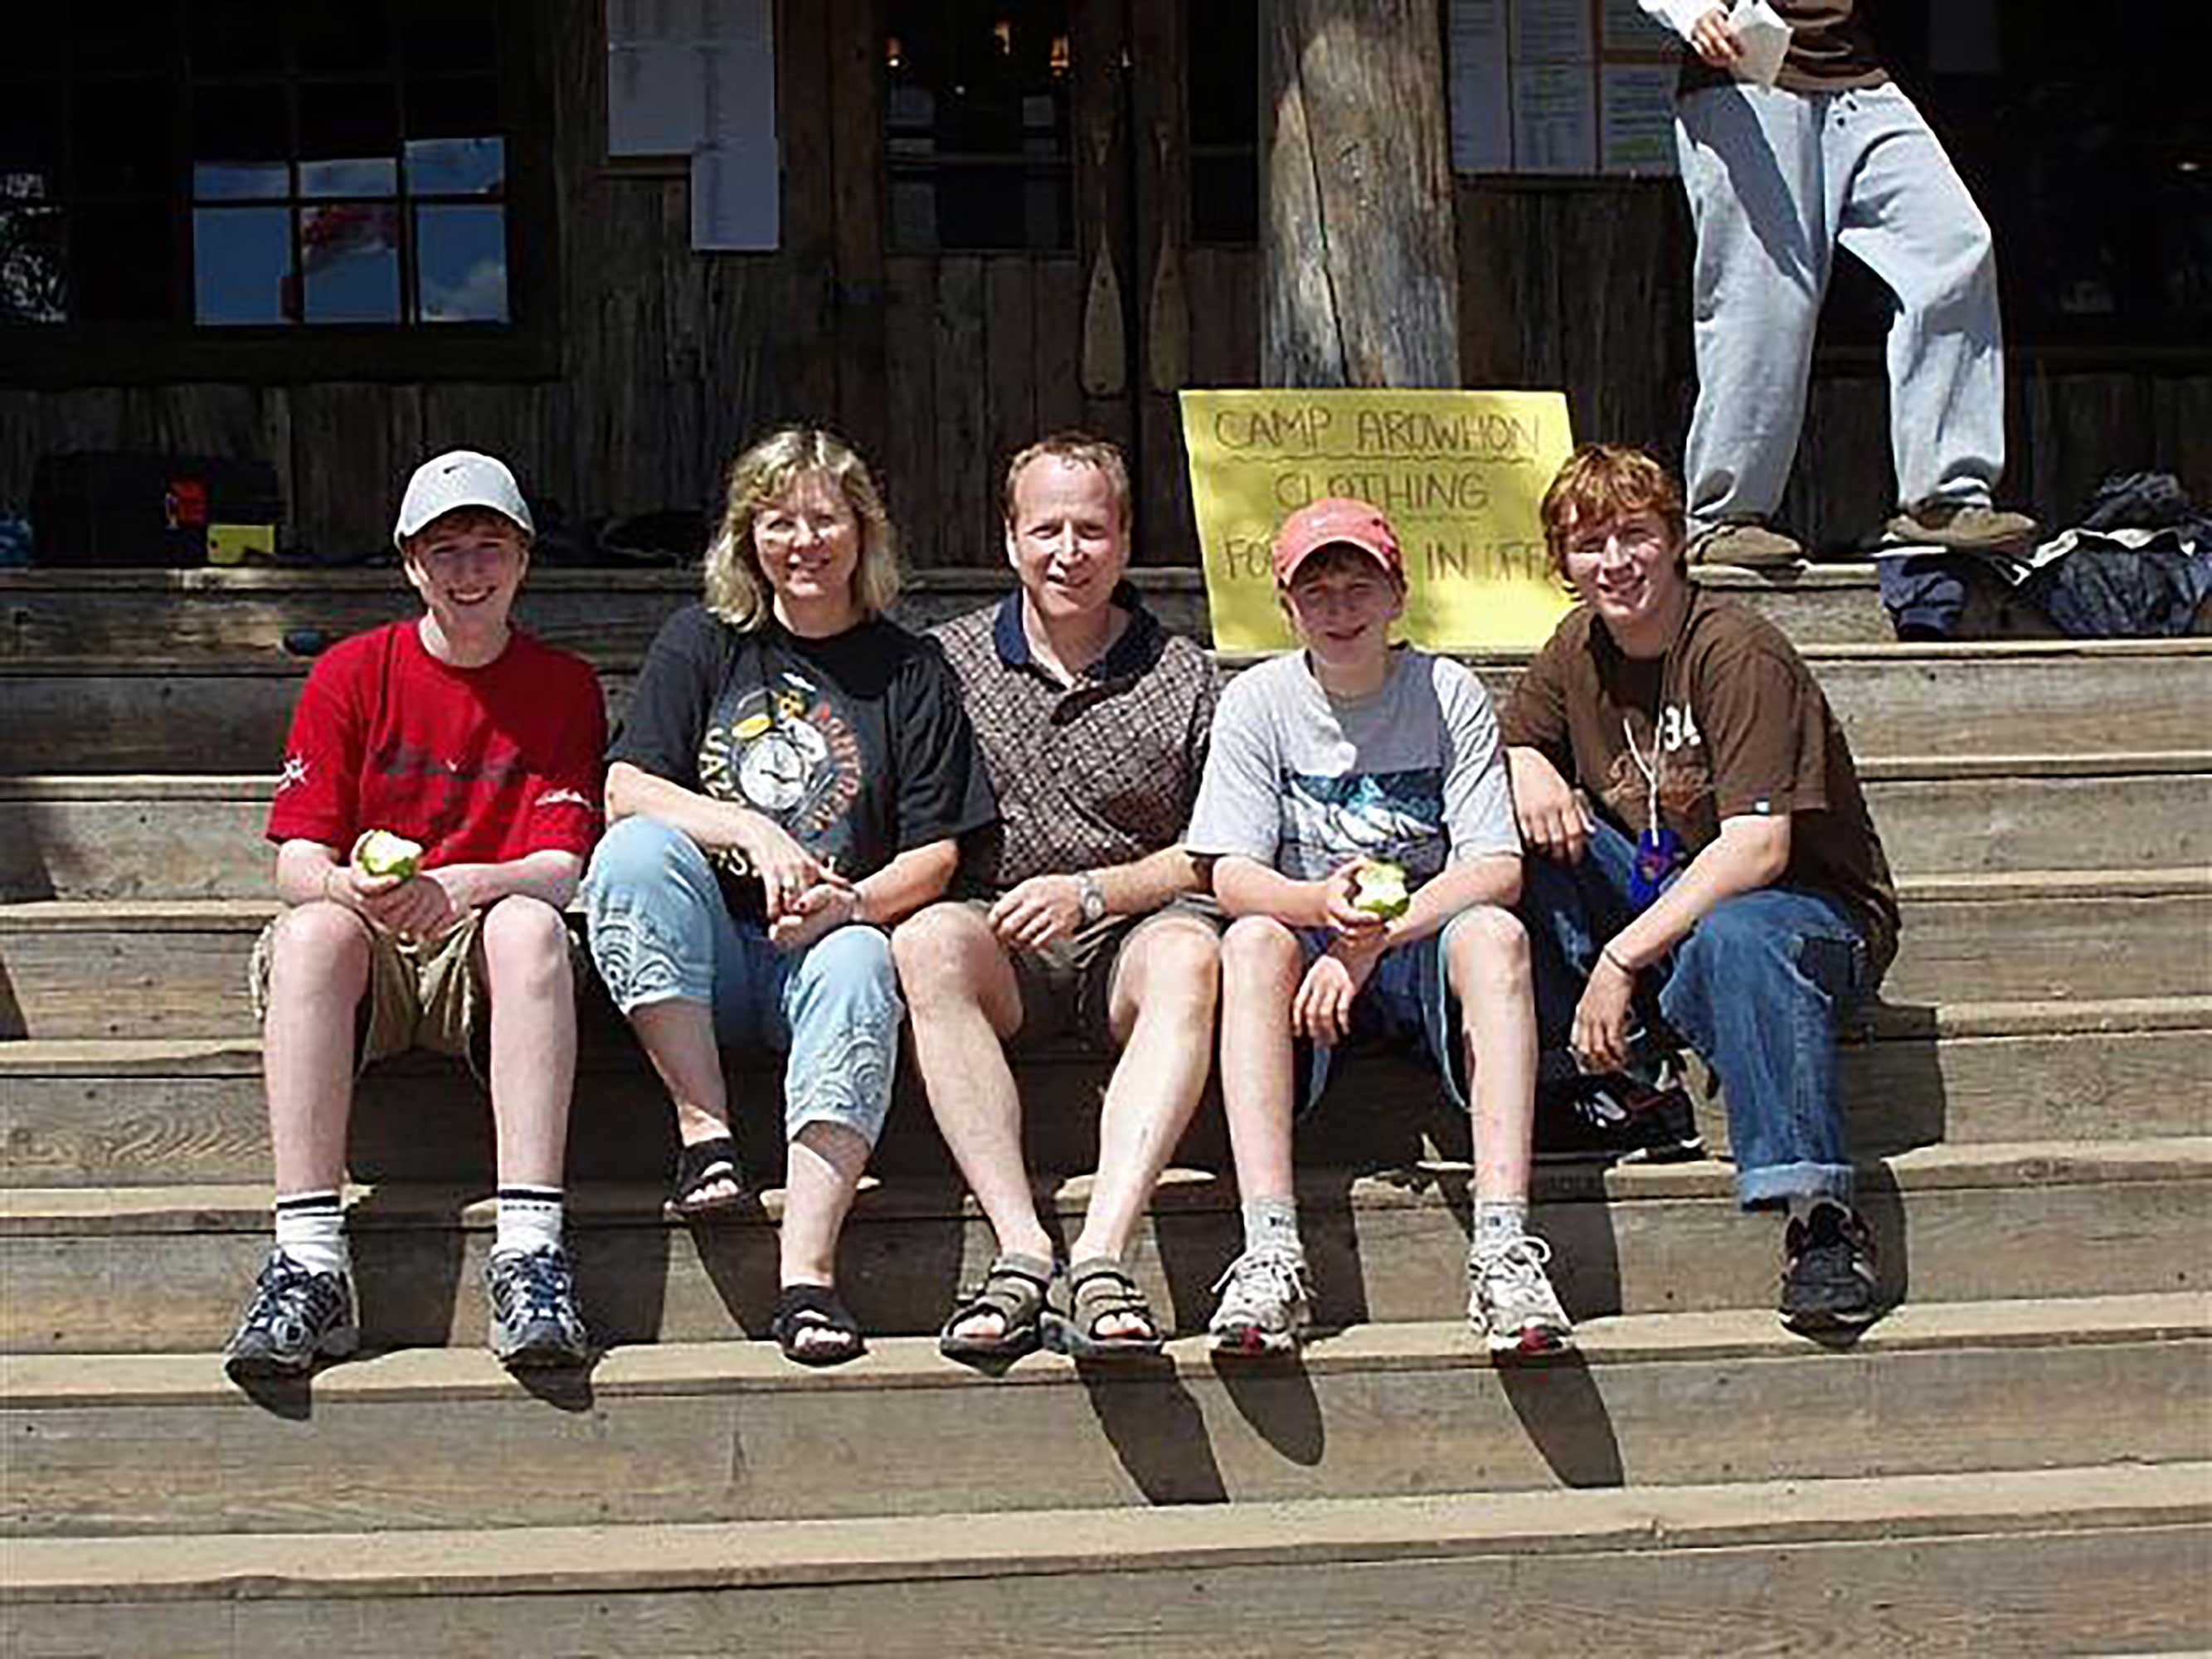 The Levene Family sits on the steps at Camp Arowhon